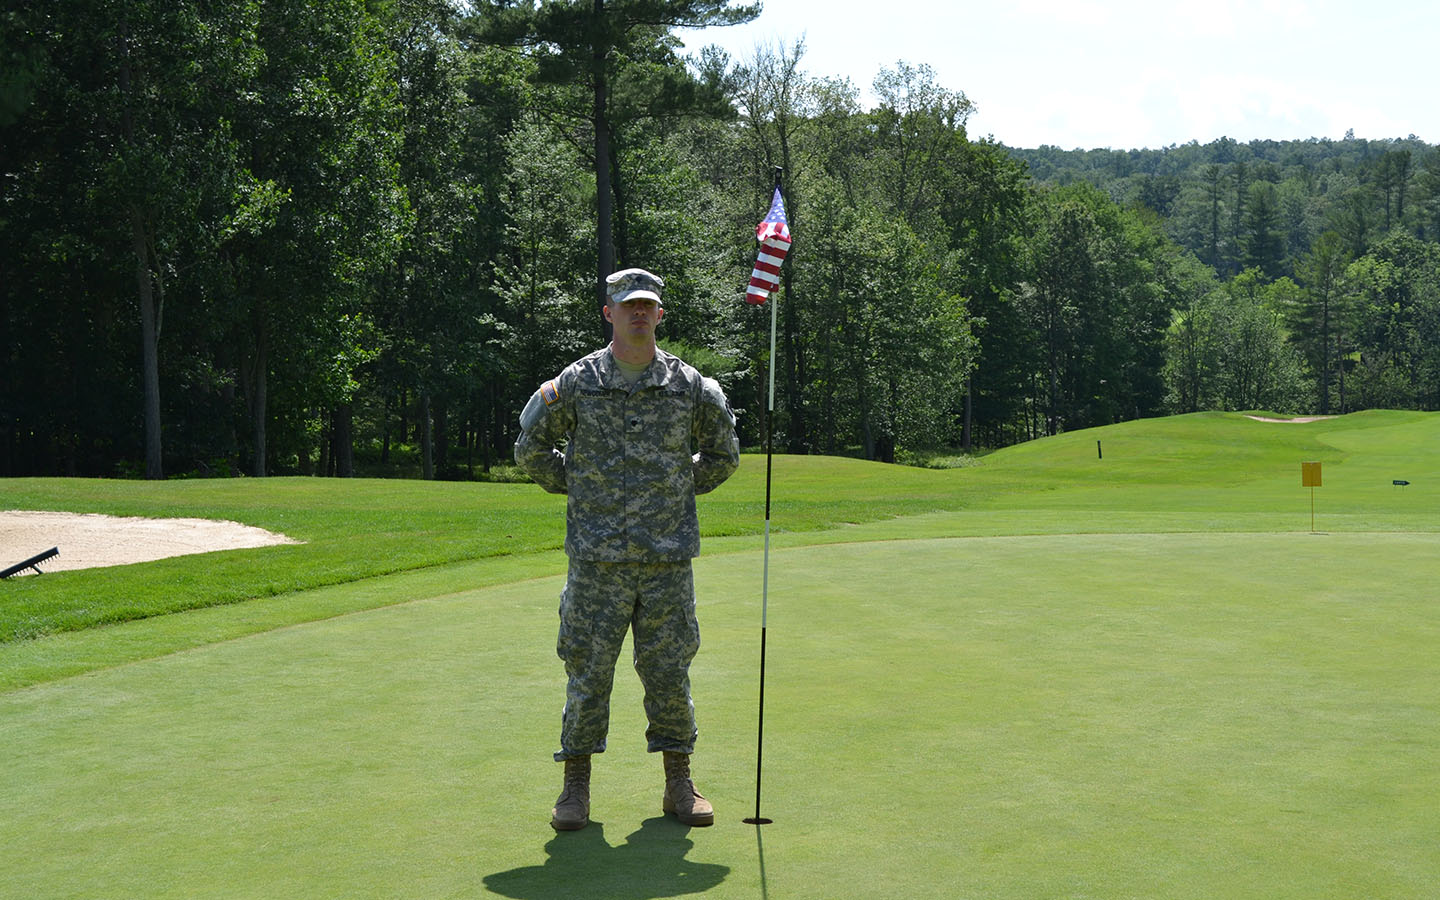 Soldier standing at attention next to a golf hole.